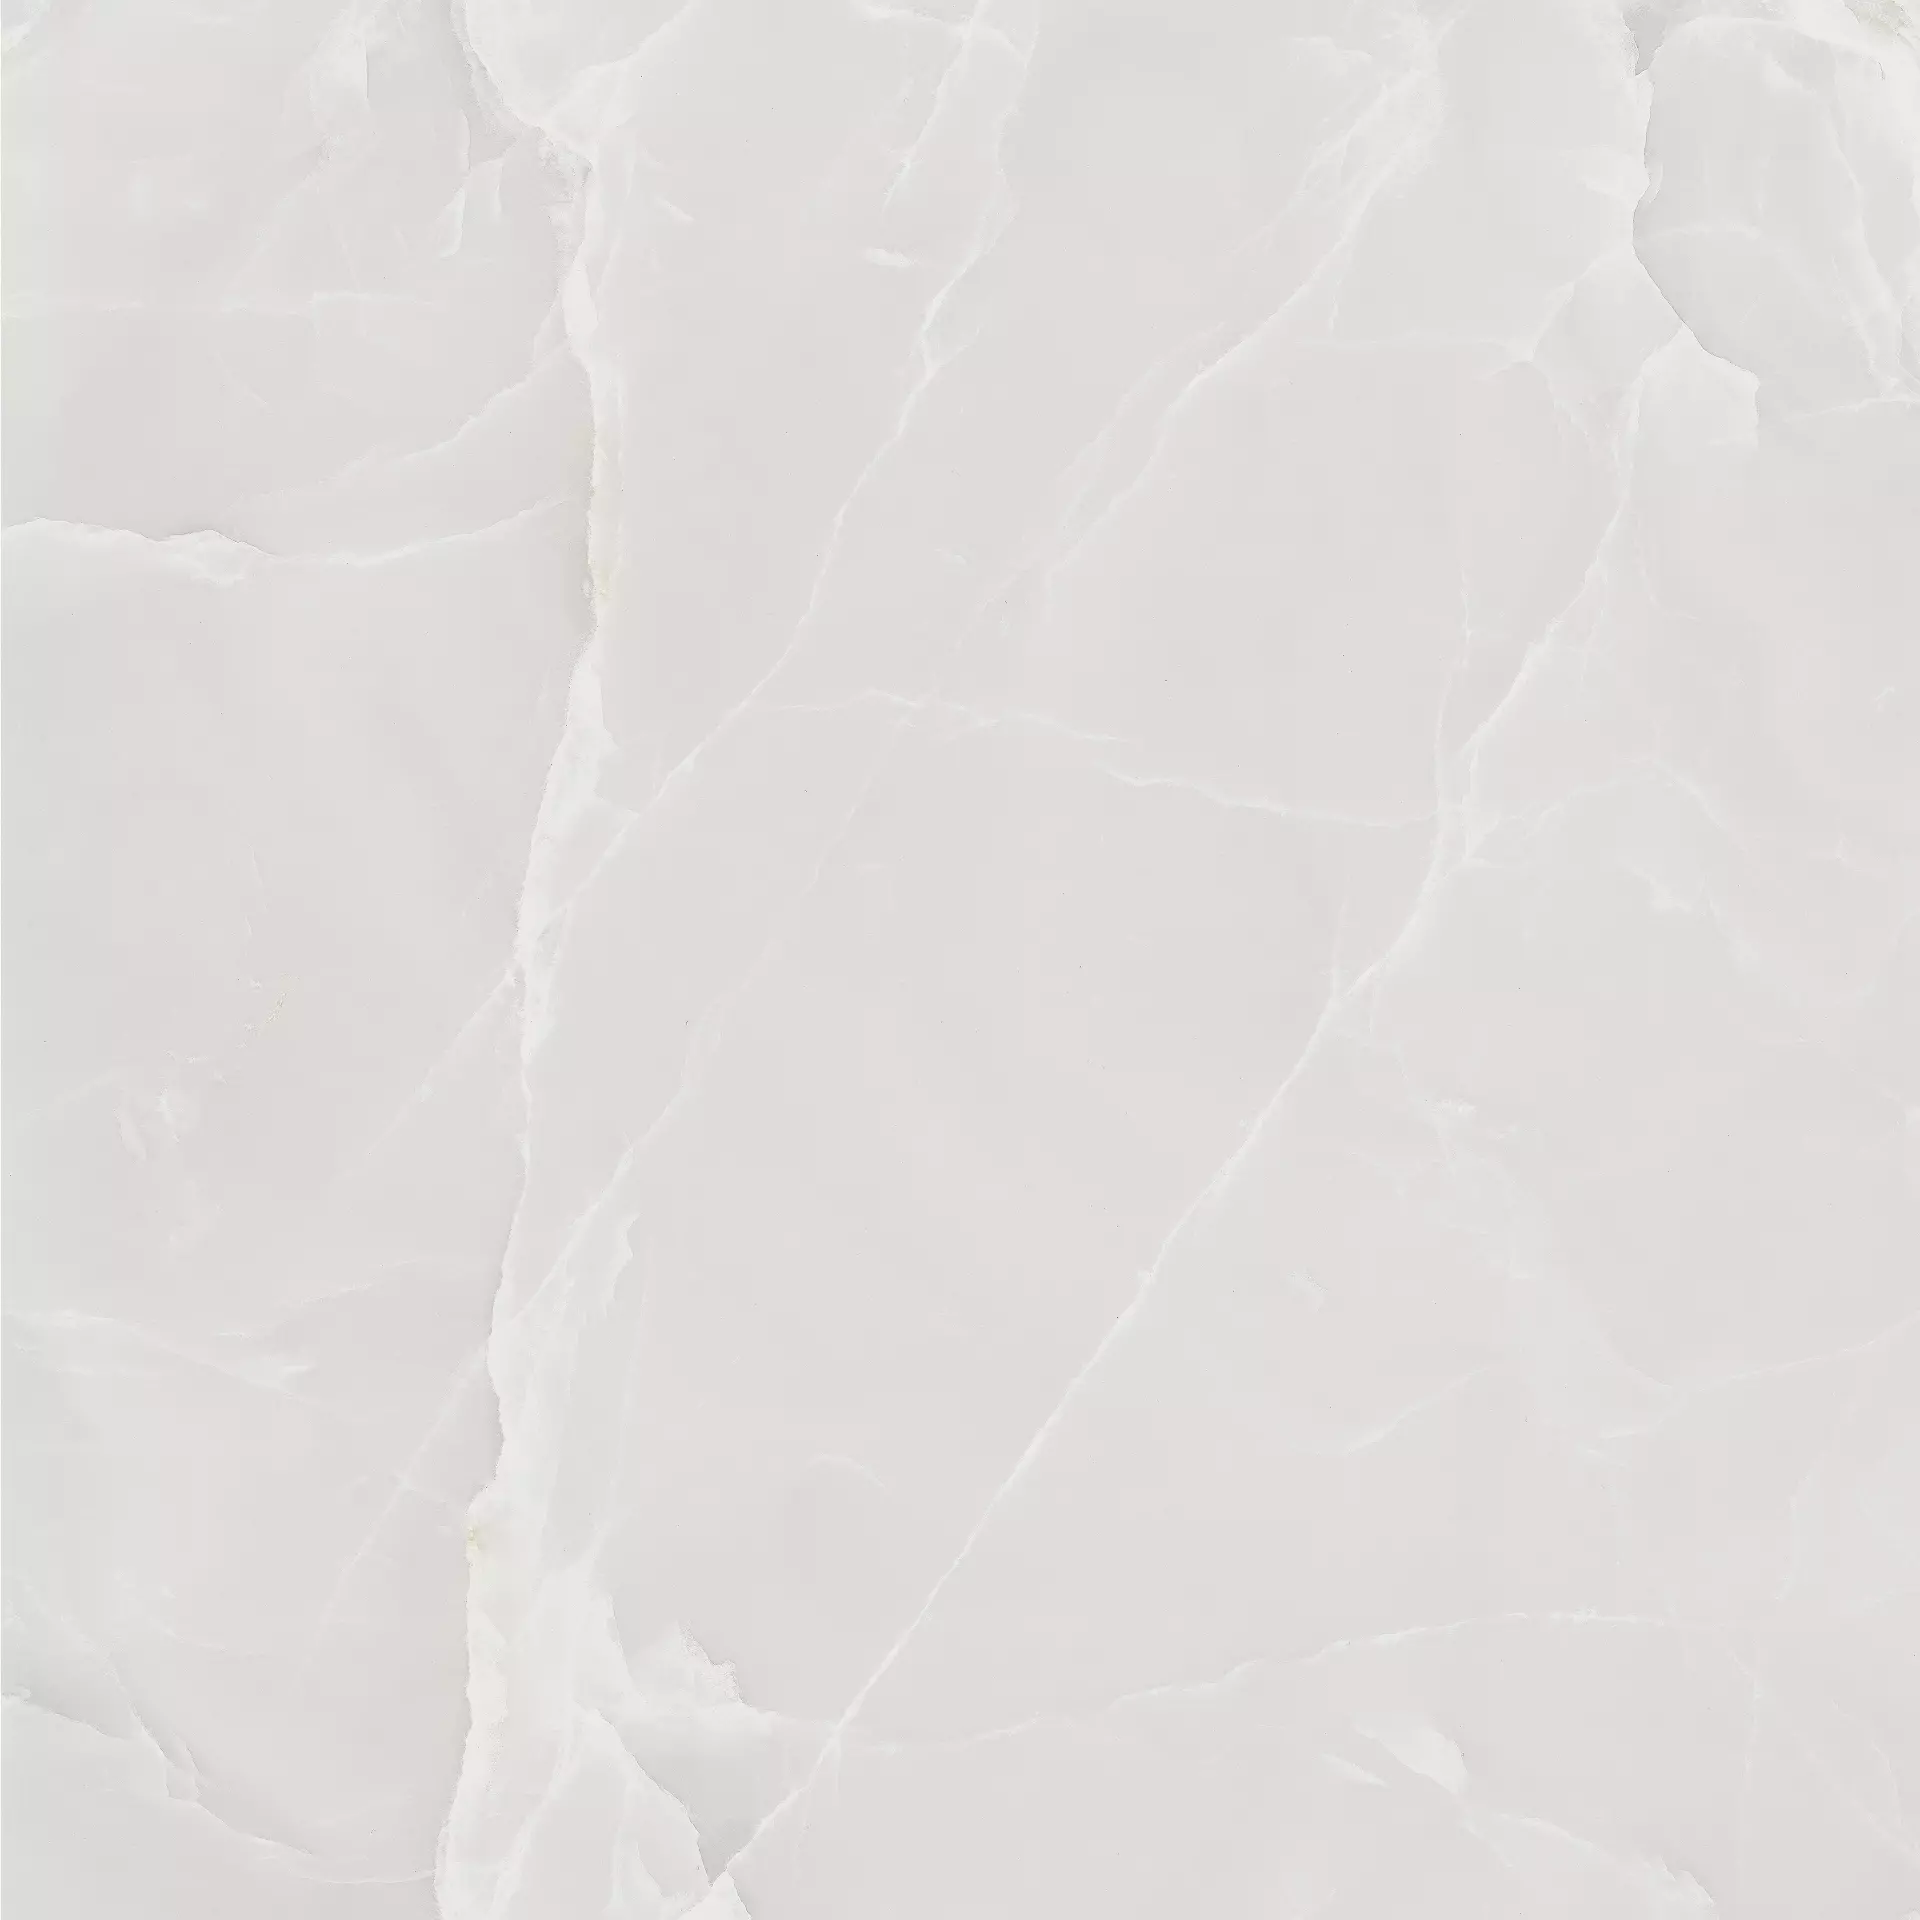 Panaria Perpetual Onice Clear Lux PGWPE25 60x60cm rectified 9mm